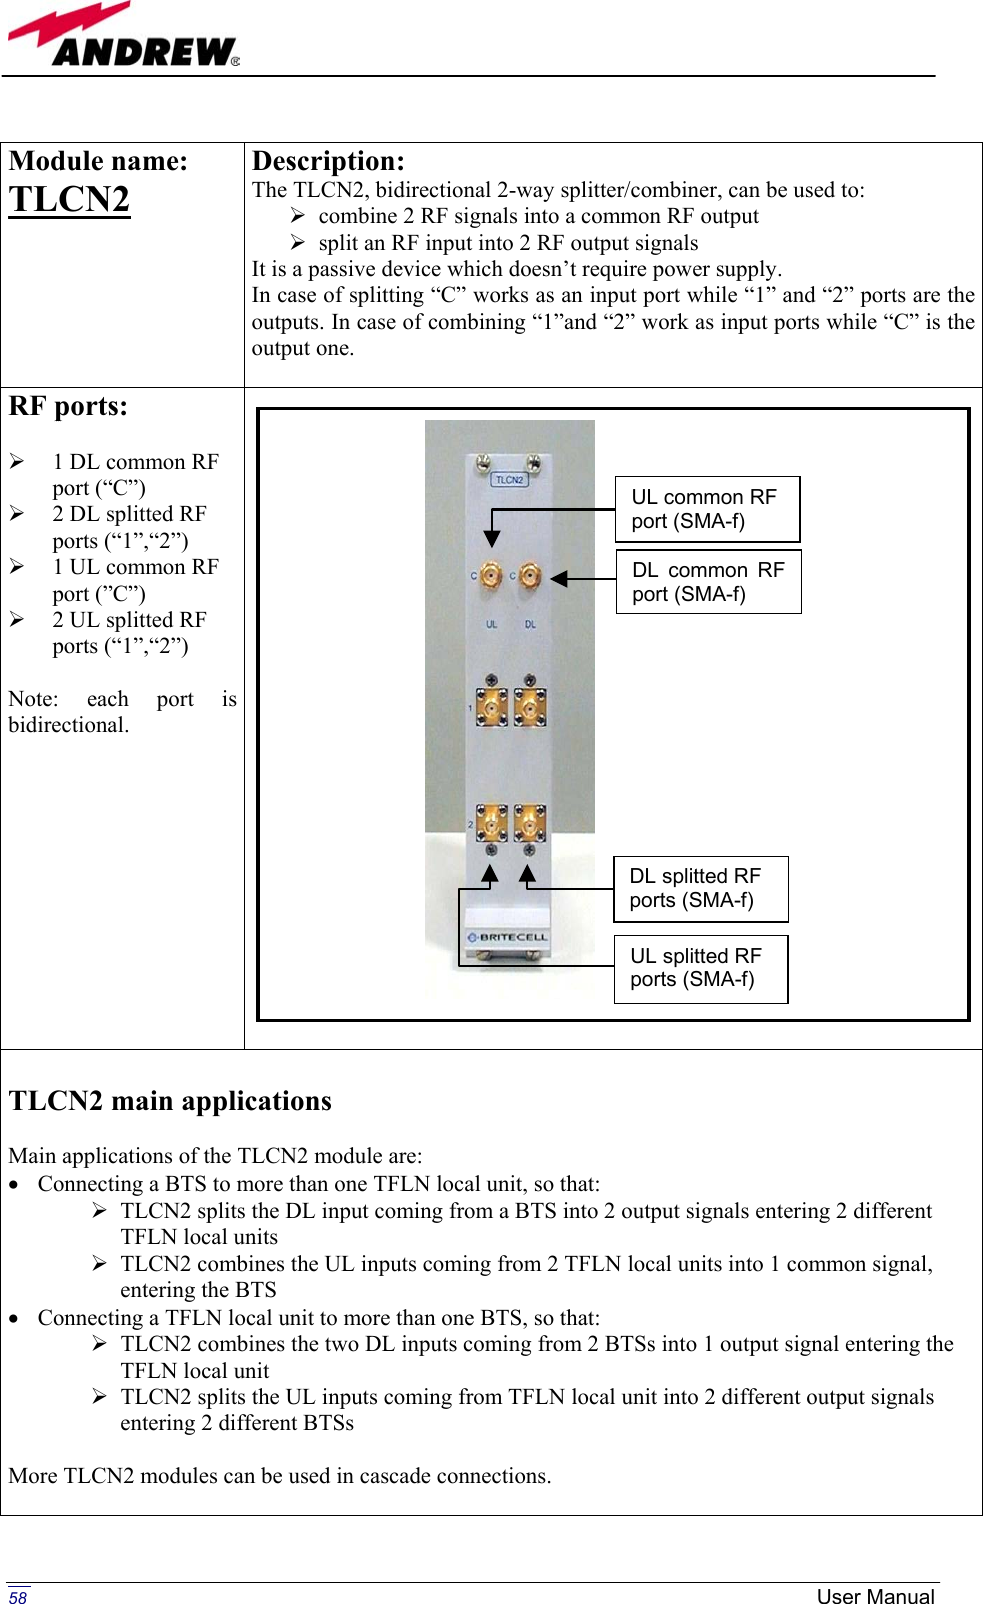   Module name:  TLCN2    Description: The TLCN2, bidirectional 2-way splitter/combiner, can be used to:  combine 2 RF signals into a common RF output  split an RF input into 2 RF output signals It is a passive device which doesn’t require power supply. In case of splitting “C” works as an input port while “1” and “2” ports are the outputs. In case of combining “1”and “2” work as input ports while “C” is the output one.  RF ports:    1 DL common RF port (“C”)    2 DL splitted RF ports (“1”,“2”)   1 UL common RF port (”C”)   2 UL splitted RF ports (“1”,“2”)  Note: each port is bidirectional.    TLCN2 main applications  Main applications of the TLCN2 module are: •  Connecting a BTS to more than one TFLN local unit, so that:  TLCN2 splits the DL input coming from a BTS into 2 output signals entering 2 different TFLN local units  TLCN2 combines the UL inputs coming from 2 TFLN local units into 1 common signal, entering the BTS •  Connecting a TFLN local unit to more than one BTS, so that:  TLCN2 combines the two DL inputs coming from 2 BTSs into 1 output signal entering the TFLN local unit  TLCN2 splits the UL inputs coming from TFLN local unit into 2 different output signals entering 2 different BTSs  More TLCN2 modules can be used in cascade connections.  DL common RF port (SMA-f)UL common RF port (SMA-f) UL splitted RF ports (SMA-f) DL splitted RF ports (SMA-f)  58  User Manual